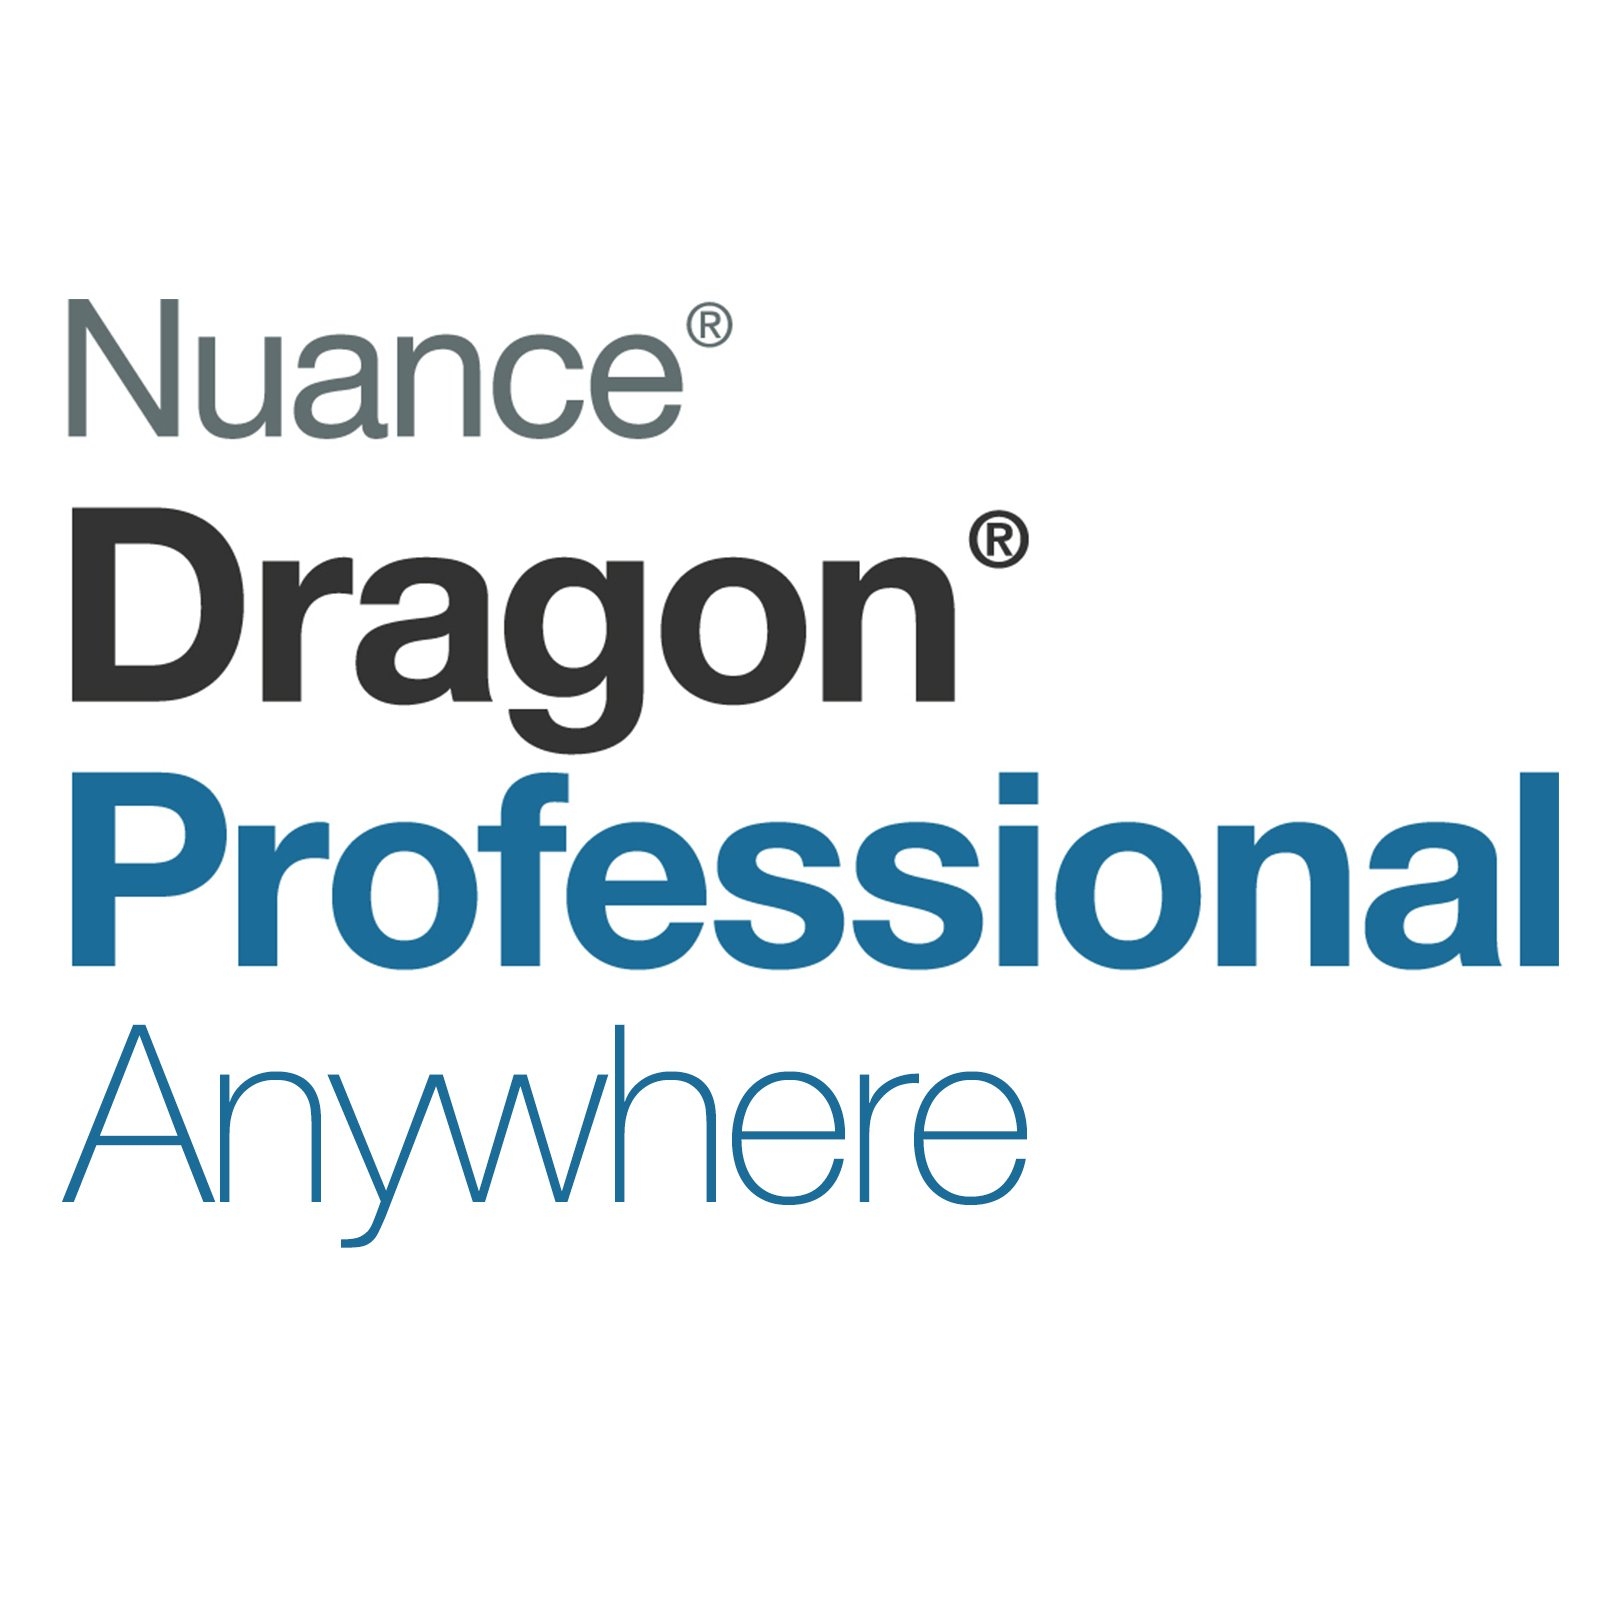 Nuance Dragon Professional Anywhere (Monthly Subscription)